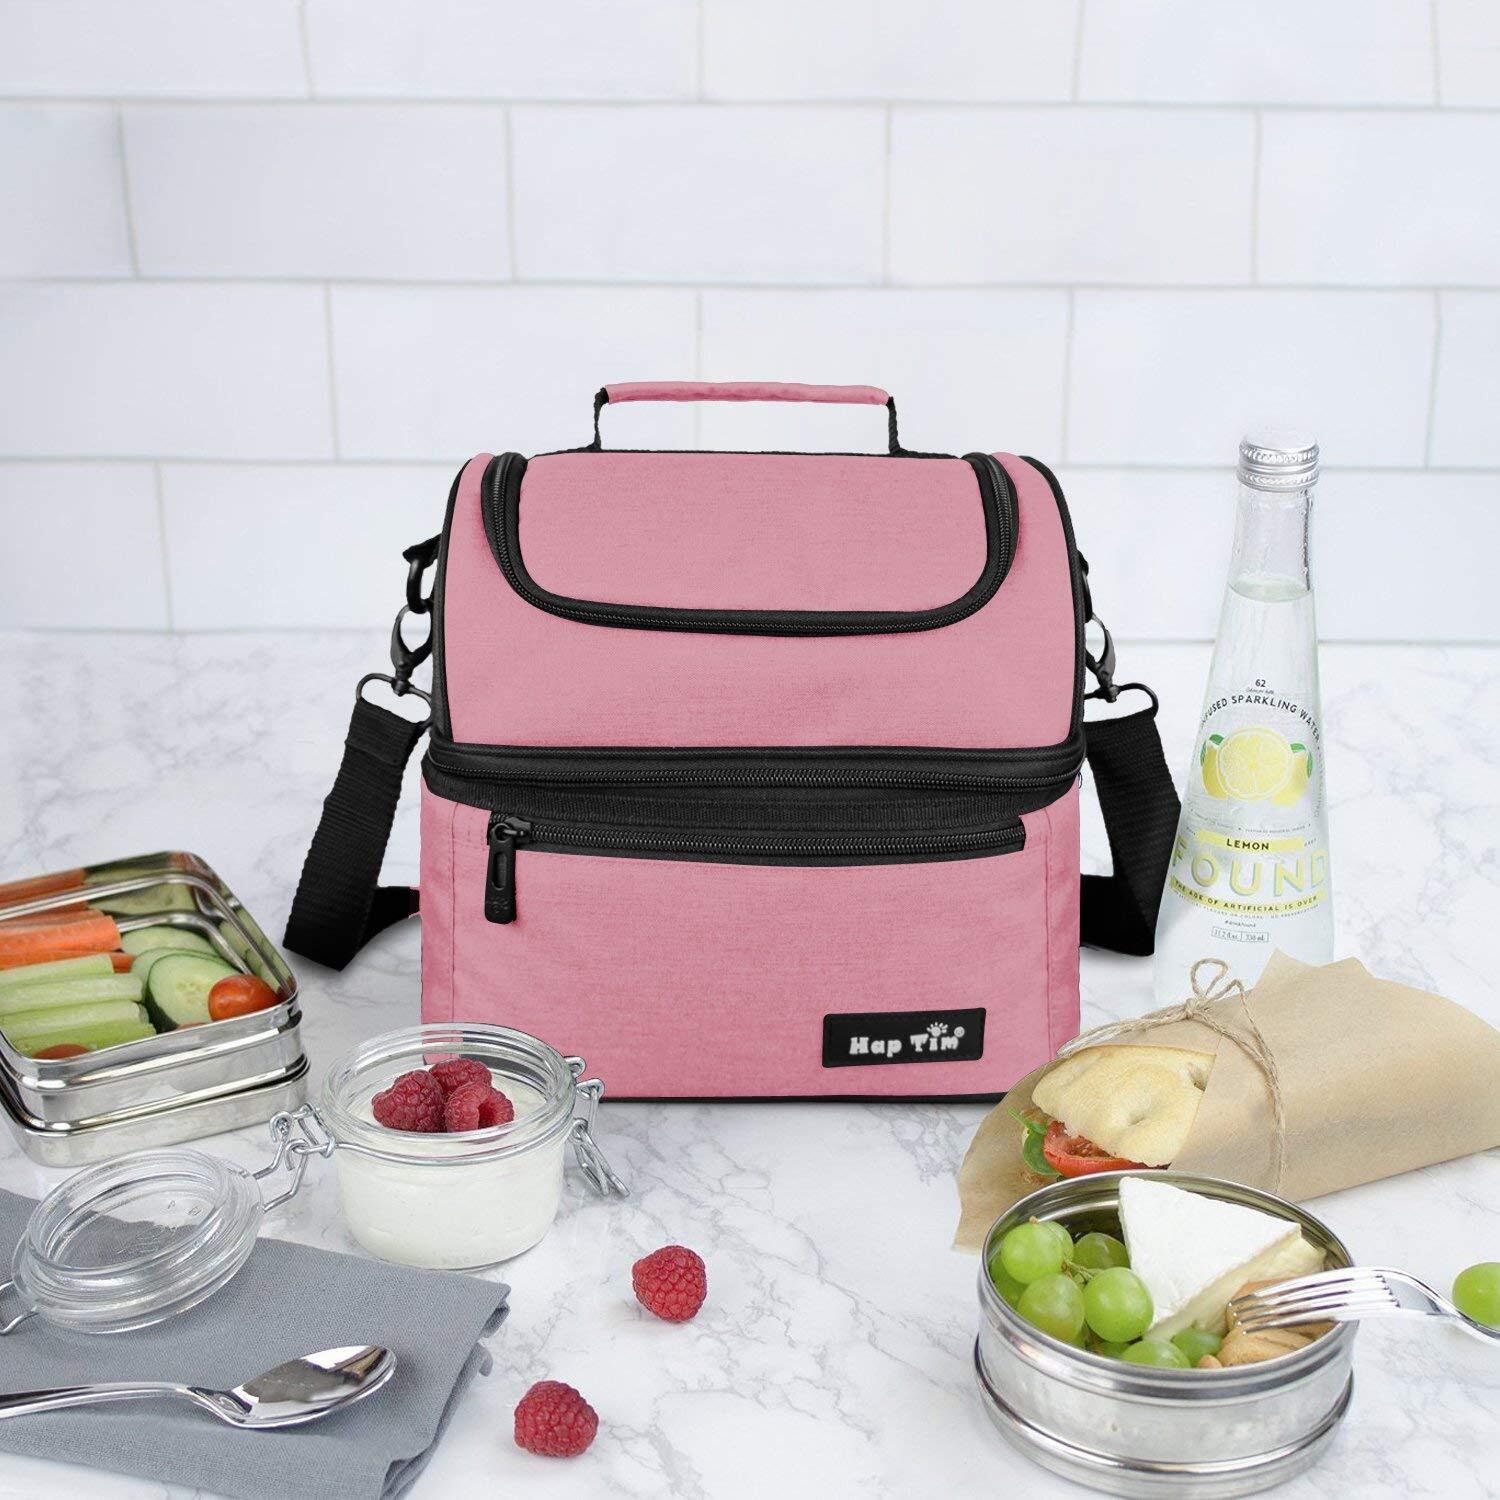 https://images.51microshop.com/1658/product/20180927/Hap_Tim_Lunch_Box_Insulated_Lunch_Bag_Large_Cooler_Tote_Bag_16040_PK__1538018295088_3.jpg